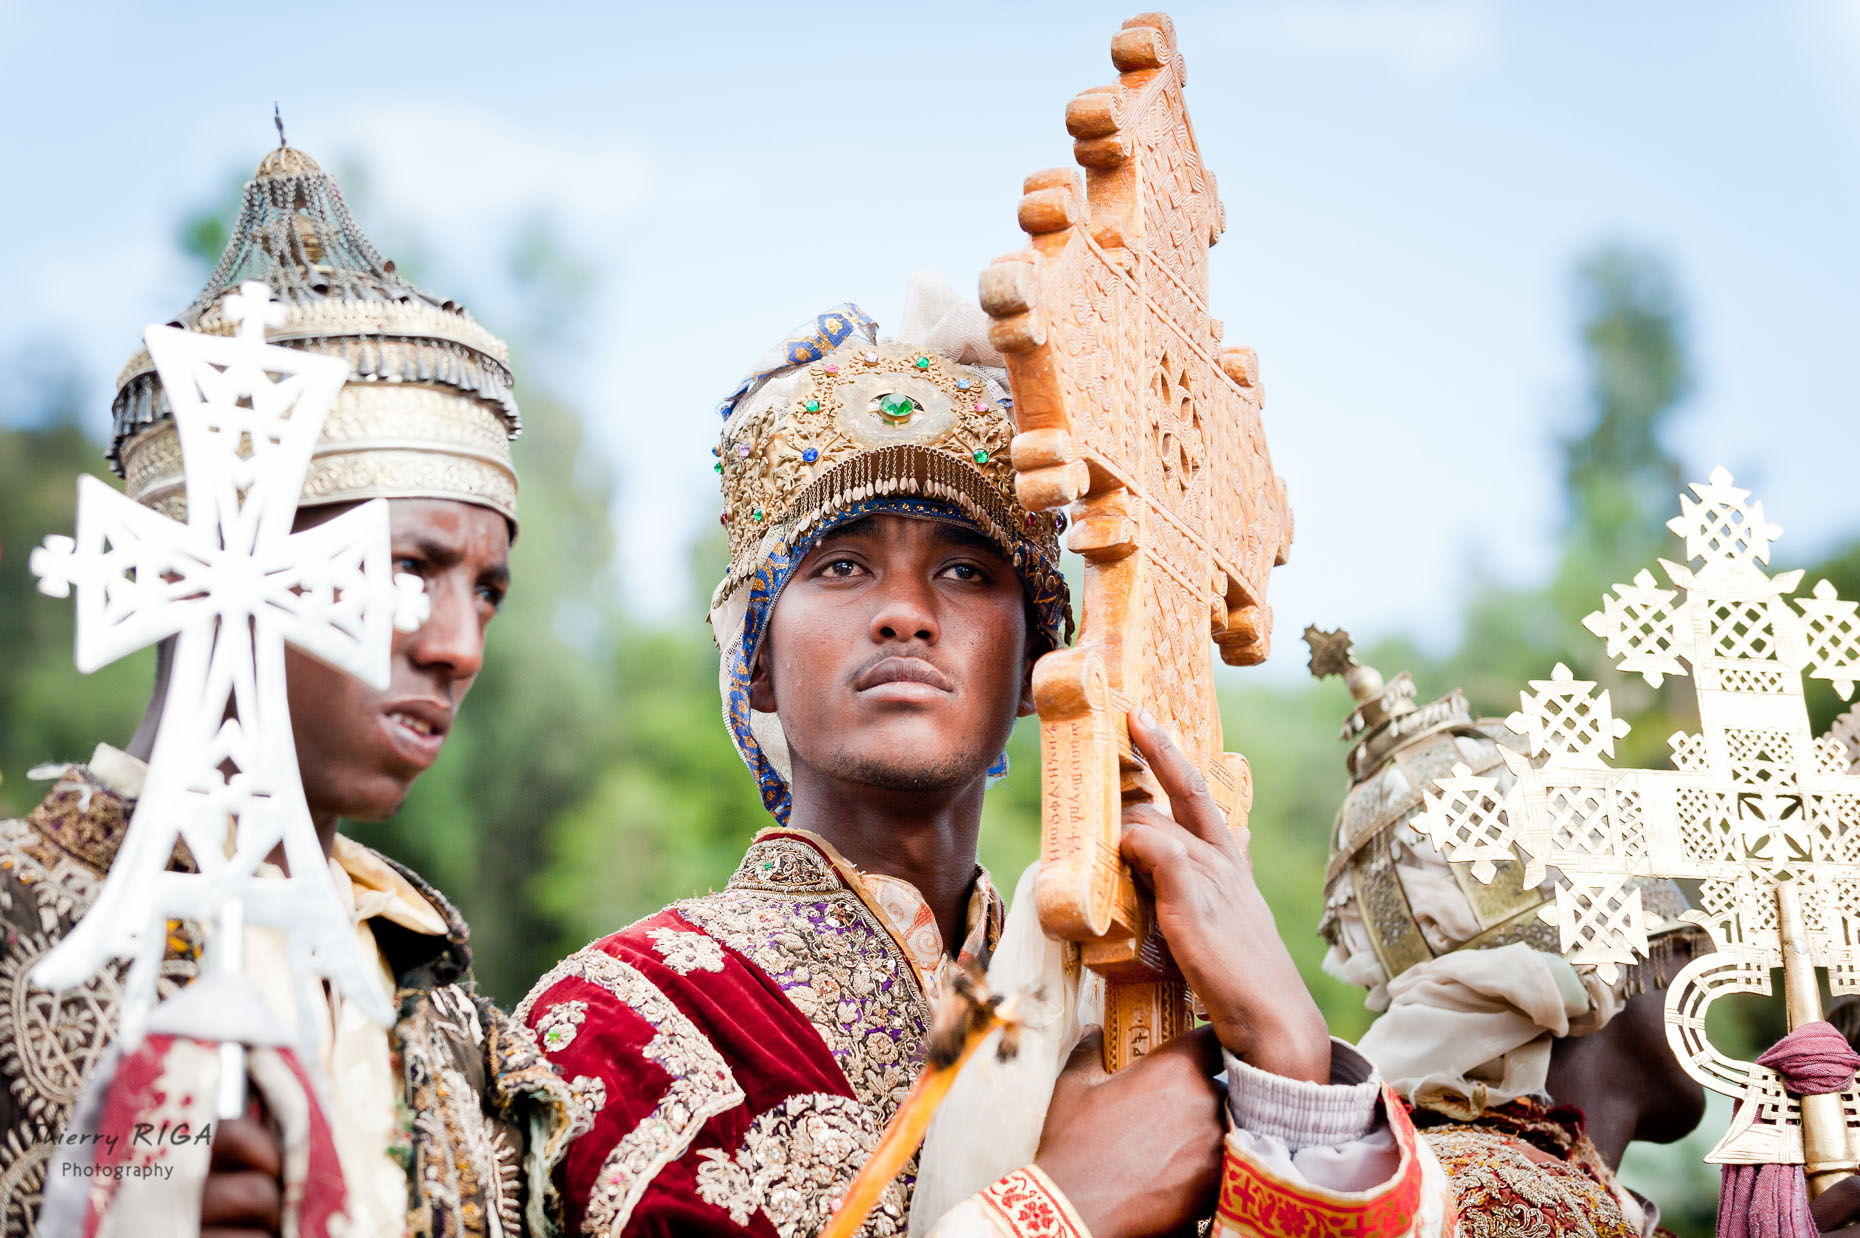 Group of priests holding crosses during Meskel ceremonies in Lalibela, Ethiopia, Thierry Riga